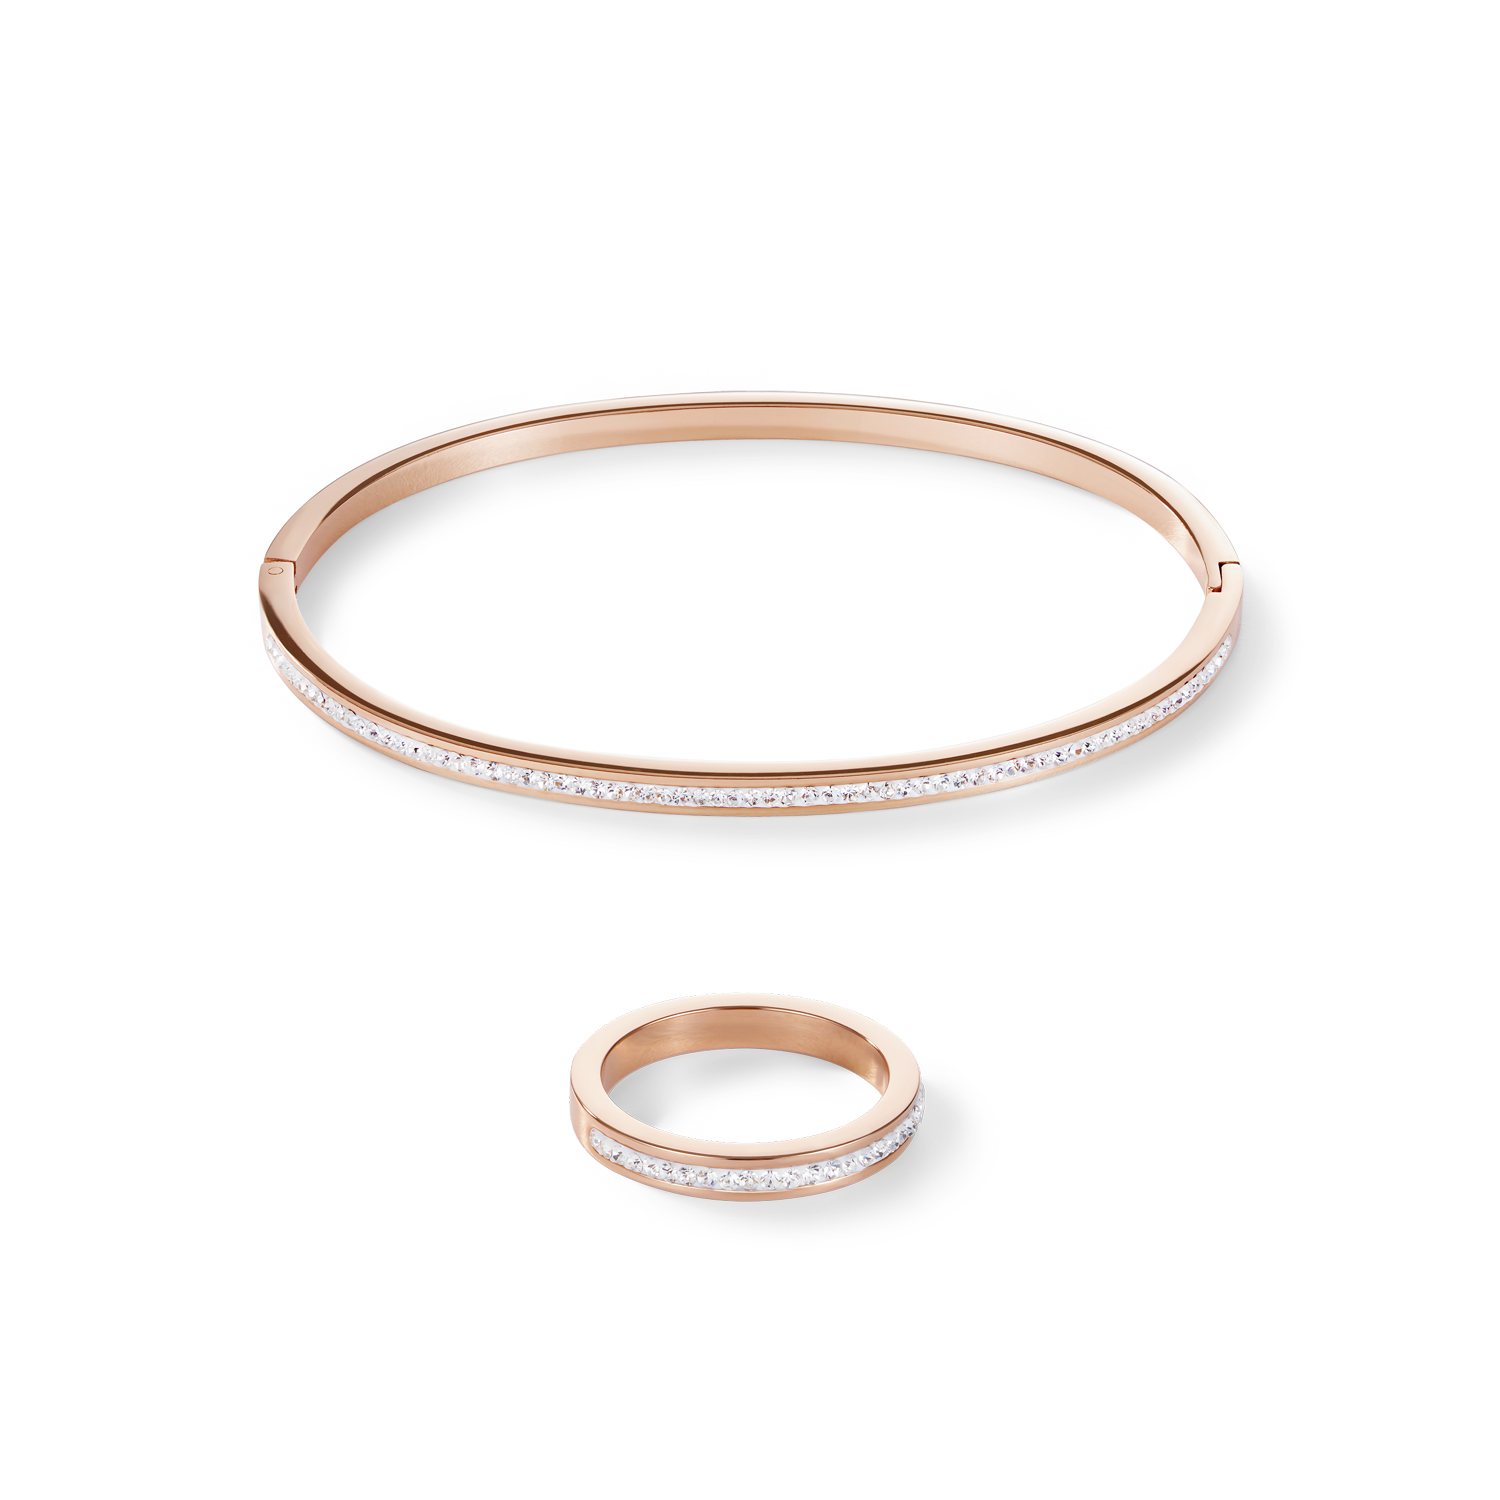 Bangle slim stainless steel rose gold & crystals pavé crystal 17